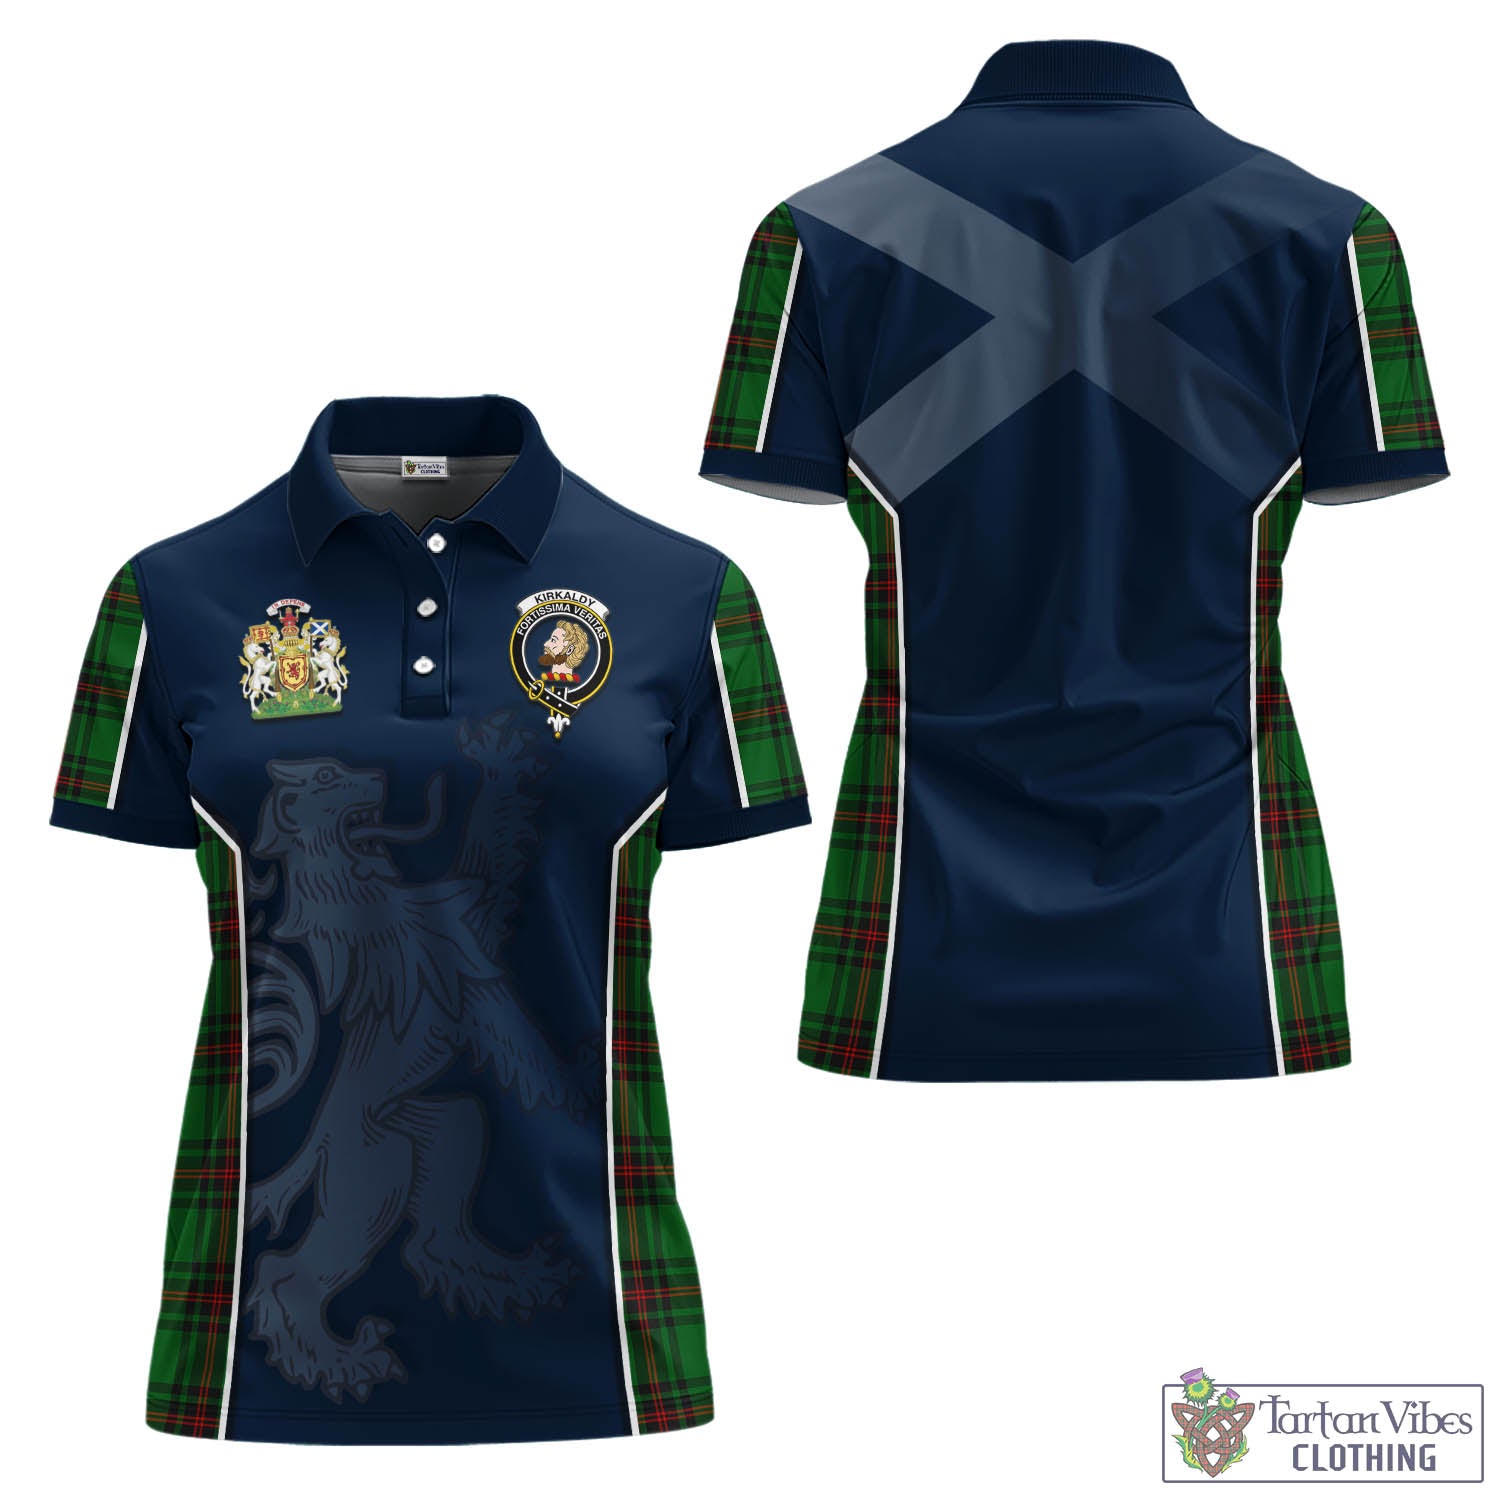 Tartan Vibes Clothing Kirkaldy Tartan Women's Polo Shirt with Family Crest and Lion Rampant Vibes Sport Style